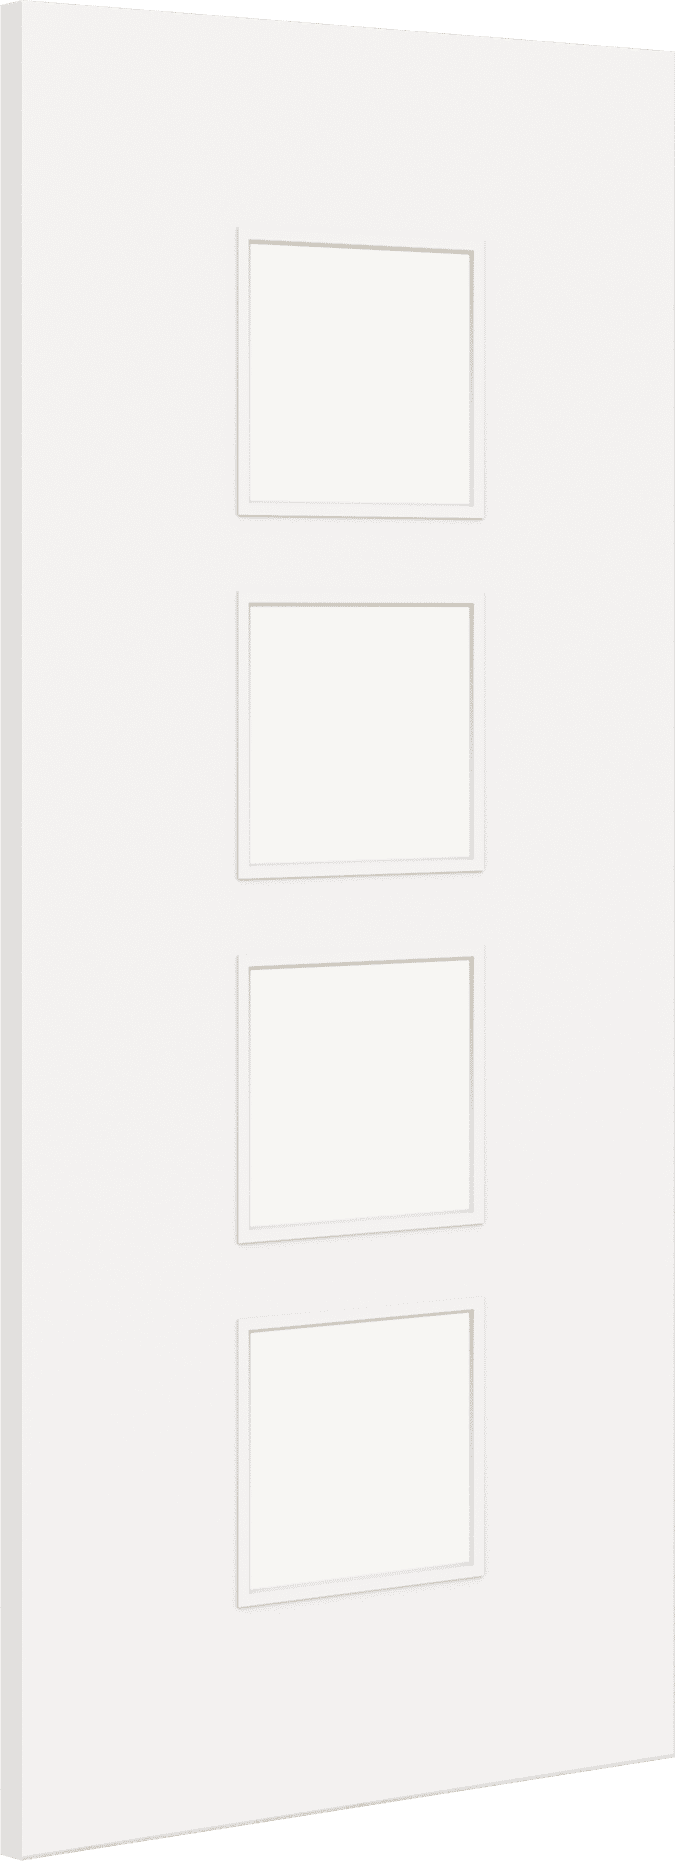 2040mm x 726mm x 44mm Architectural Paint Grade White 09 Clear Glazed Fire Door Blank